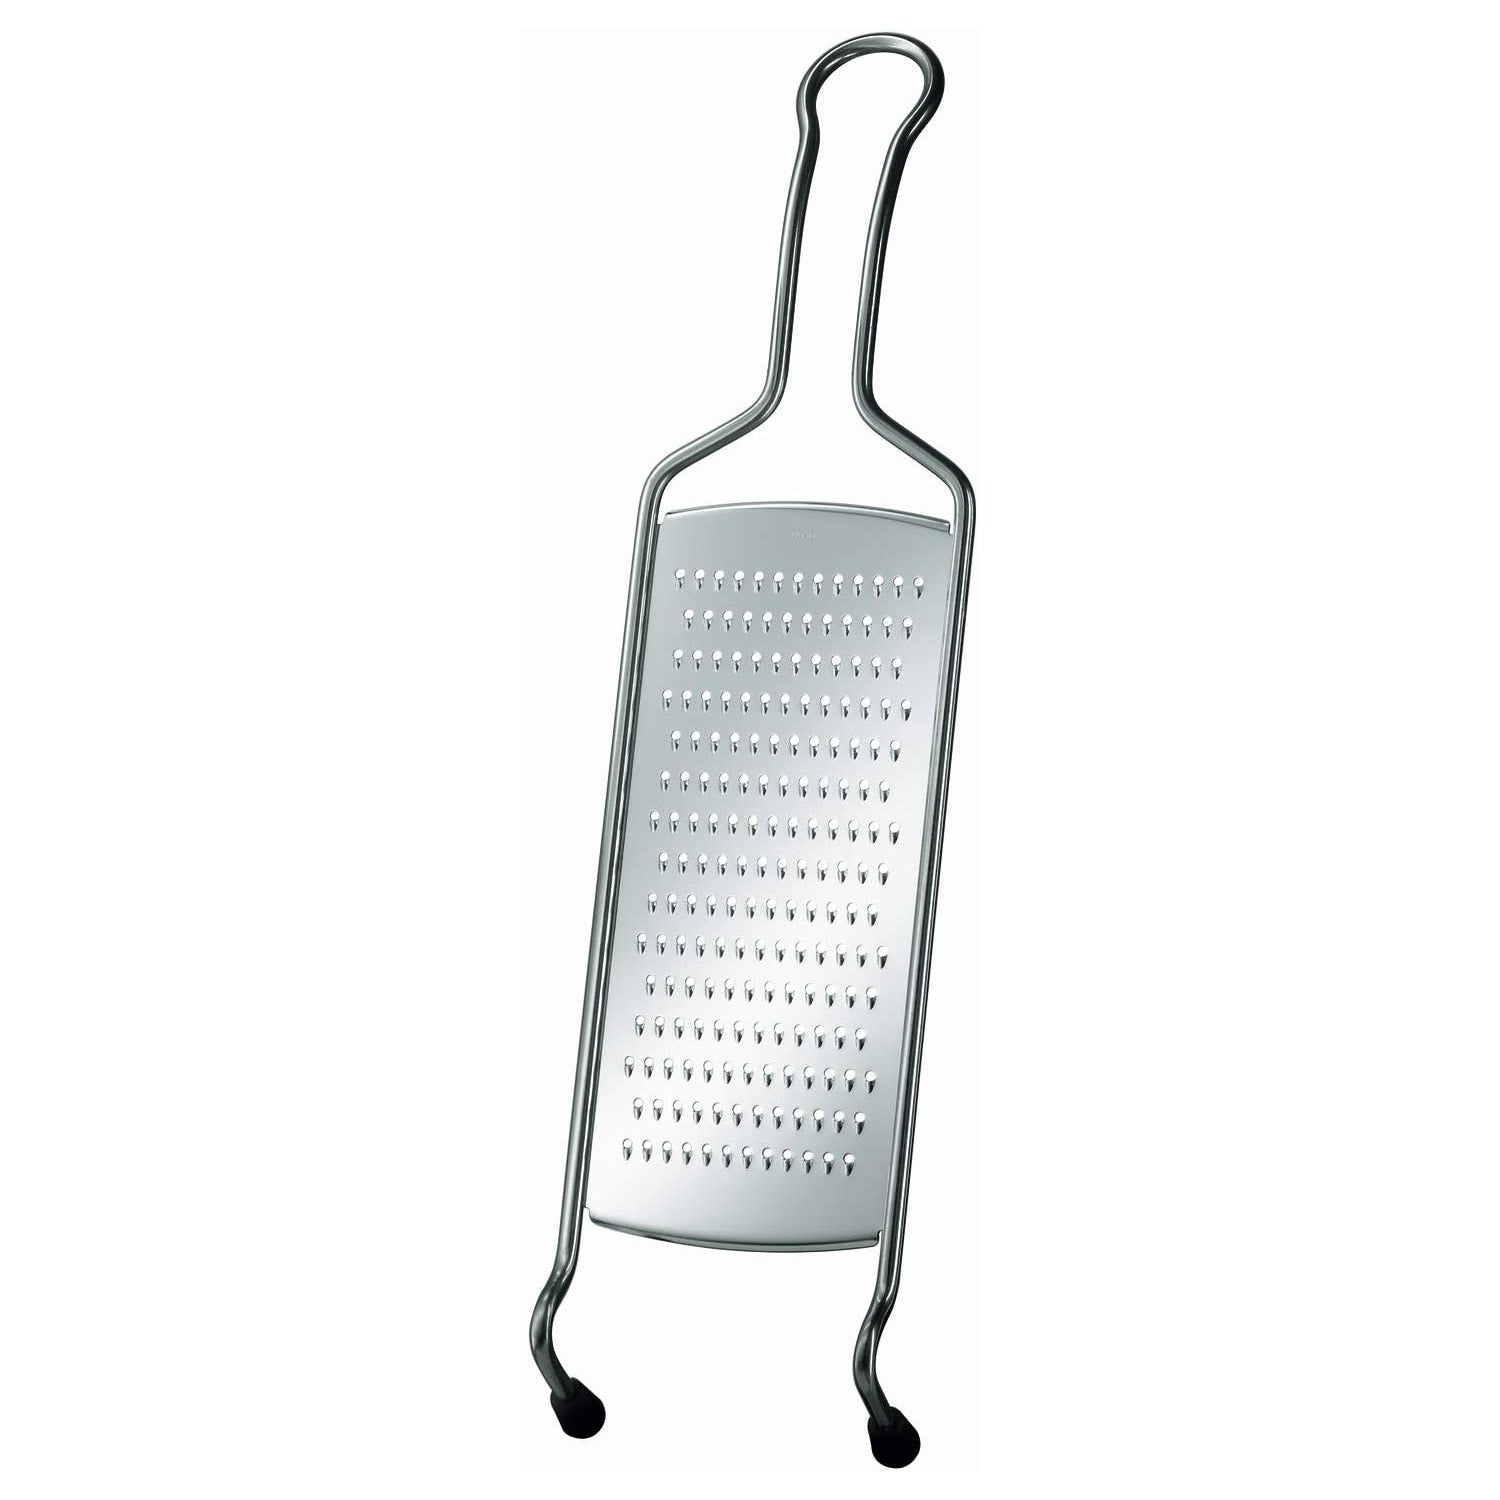 Henckels Cooking Tools 18/10 Stainless Steel, Cheese Grater